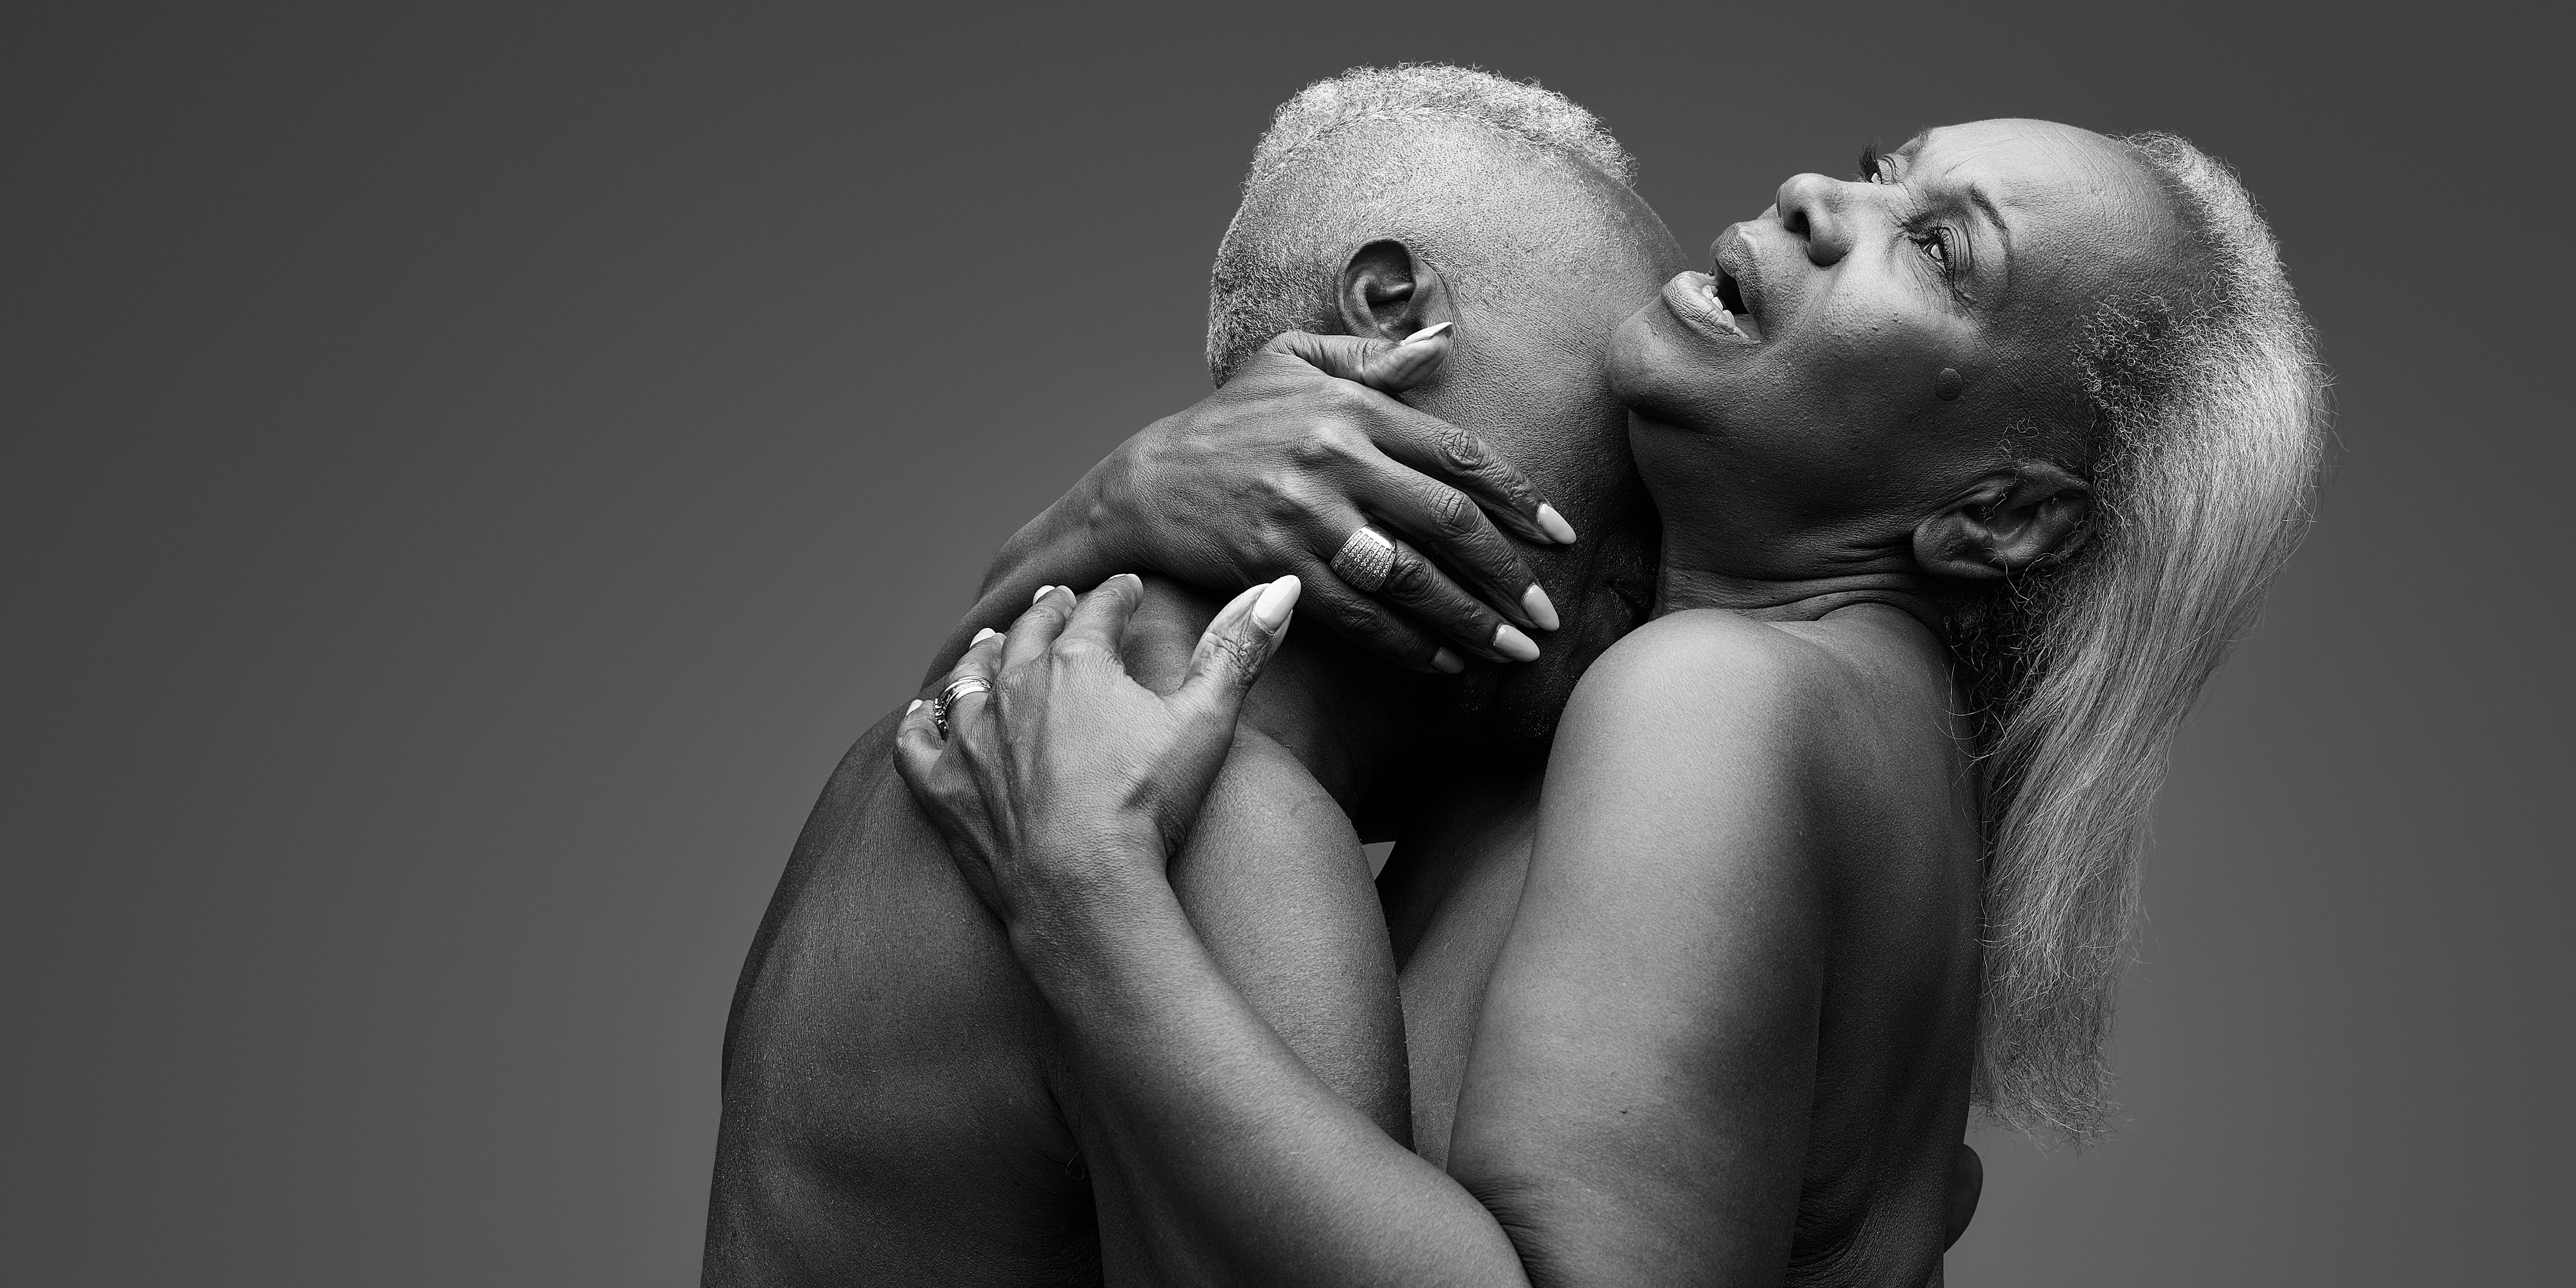 Why Rankin and Relates campaign celebrating intimacy in our later years is so brilliantly important The Independent